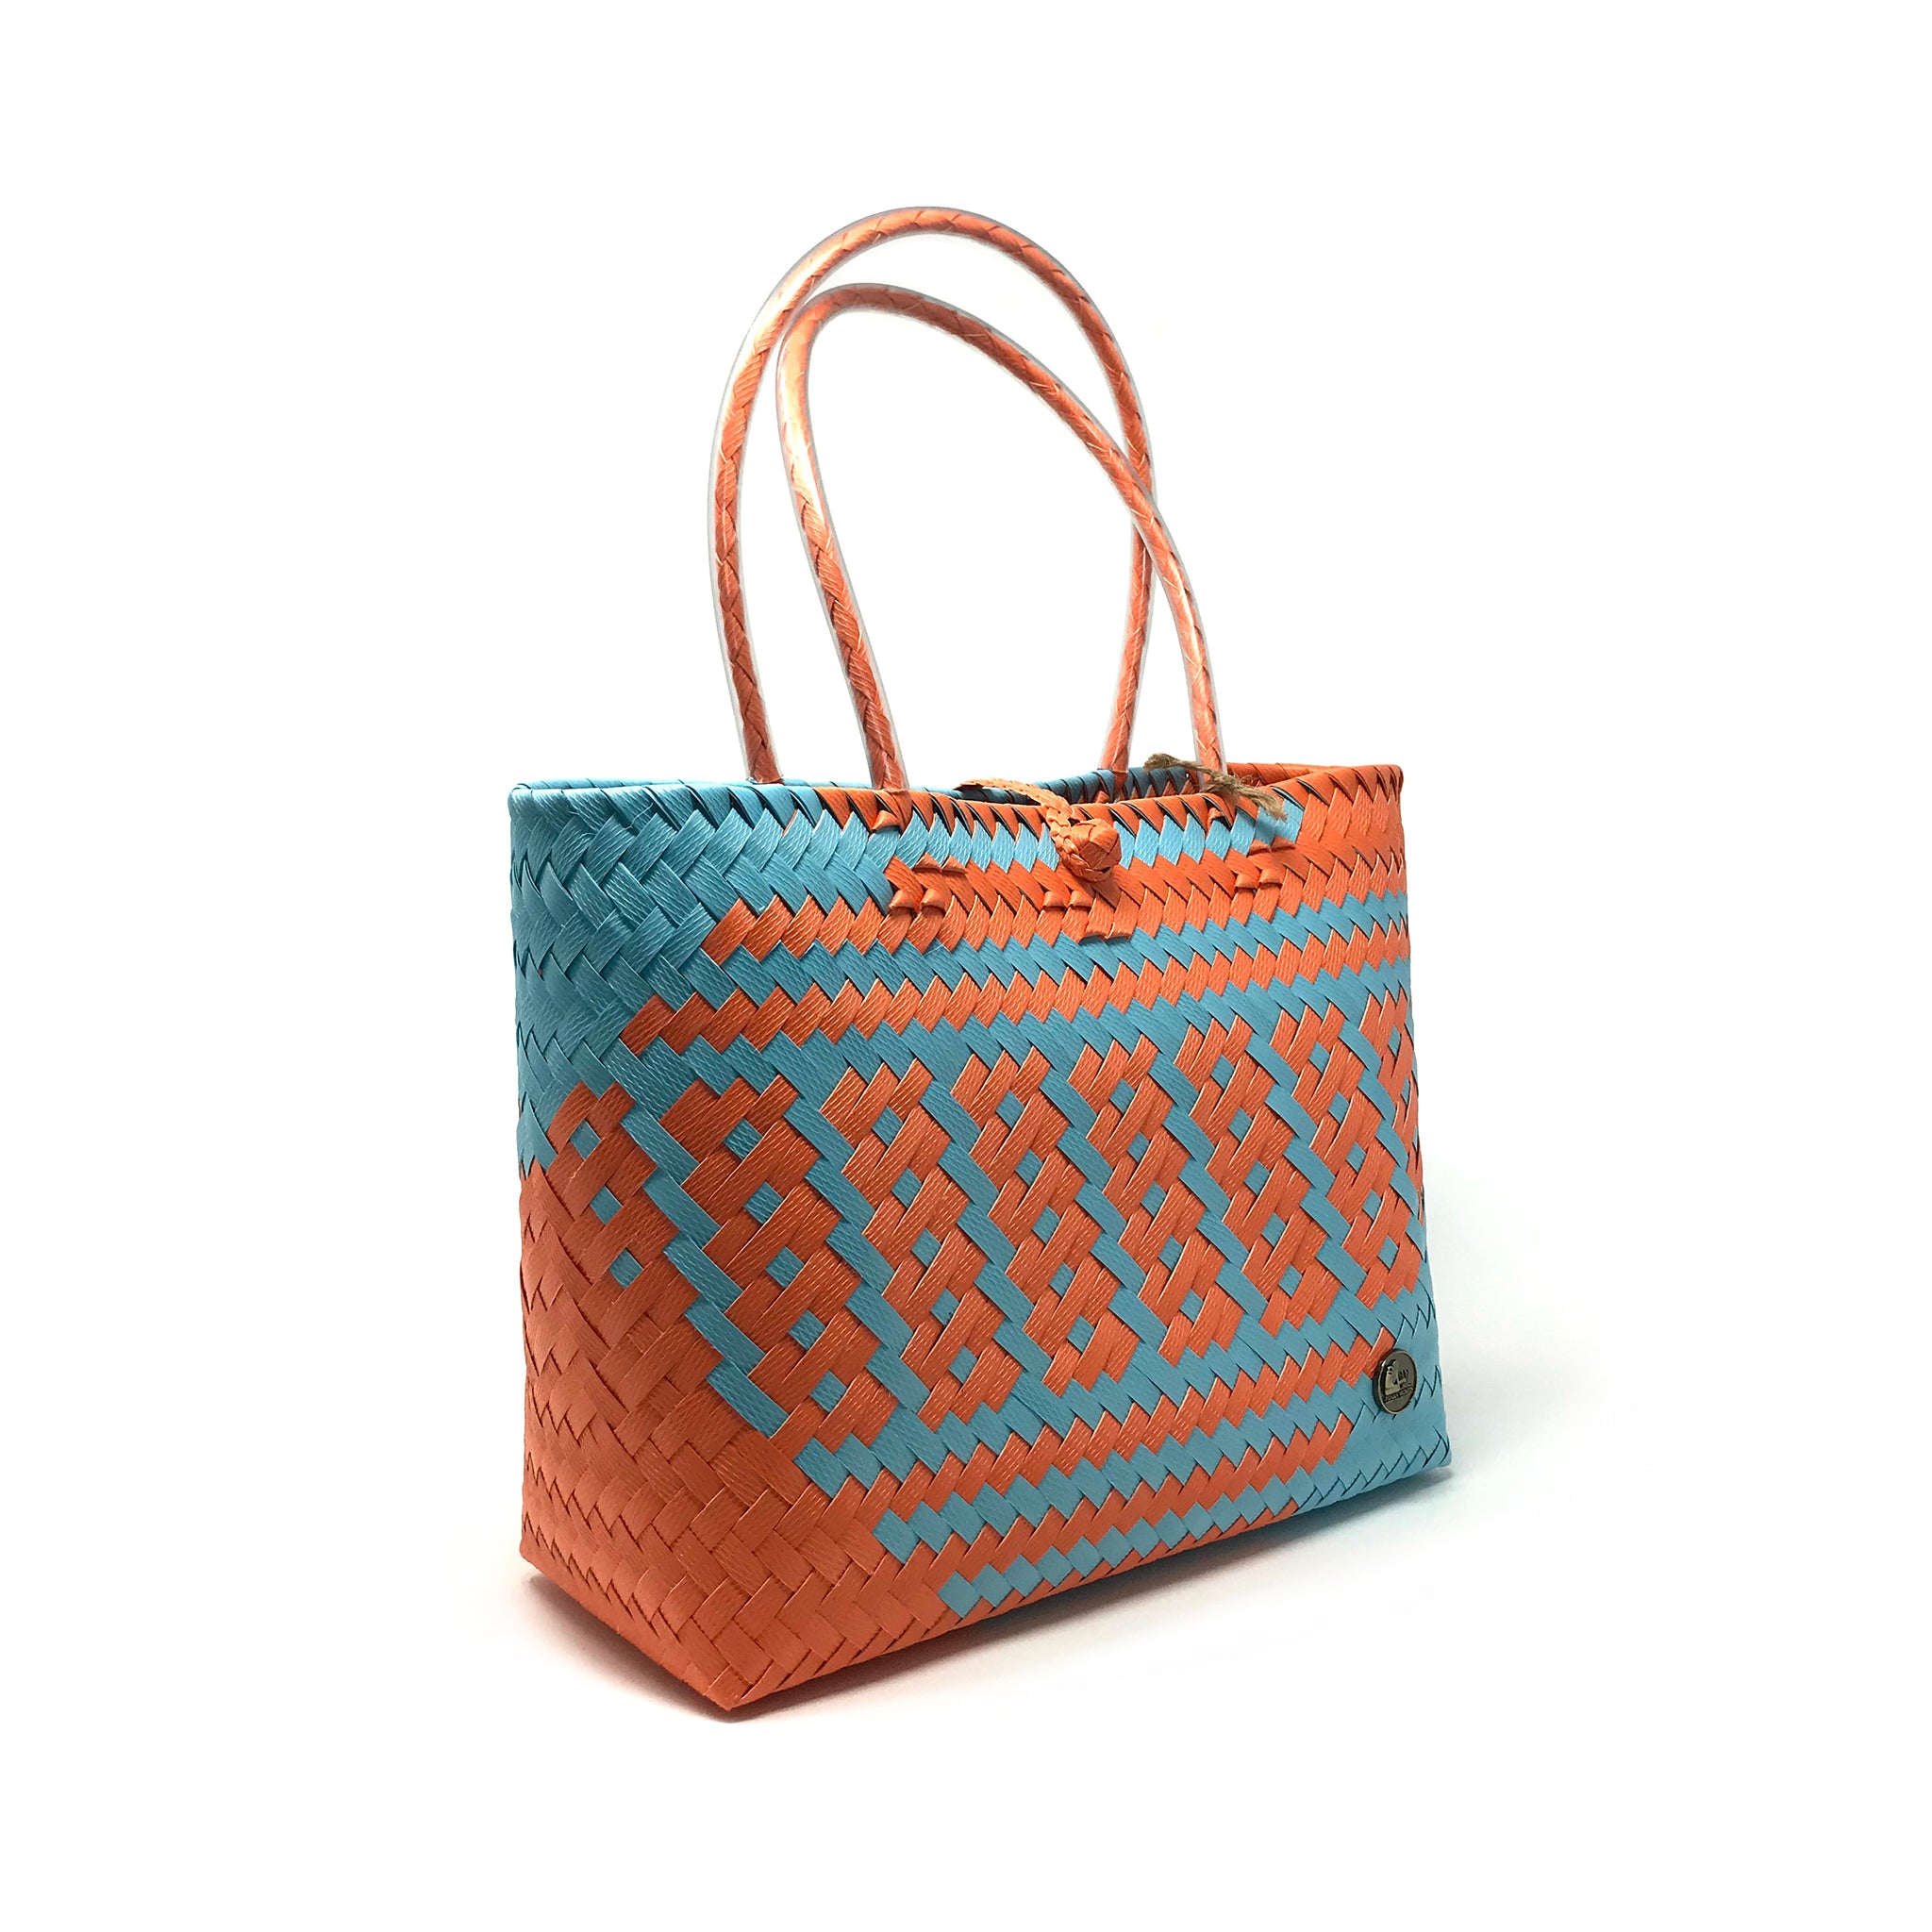 Blue and orange small size tote bag at a 45-degree angle.